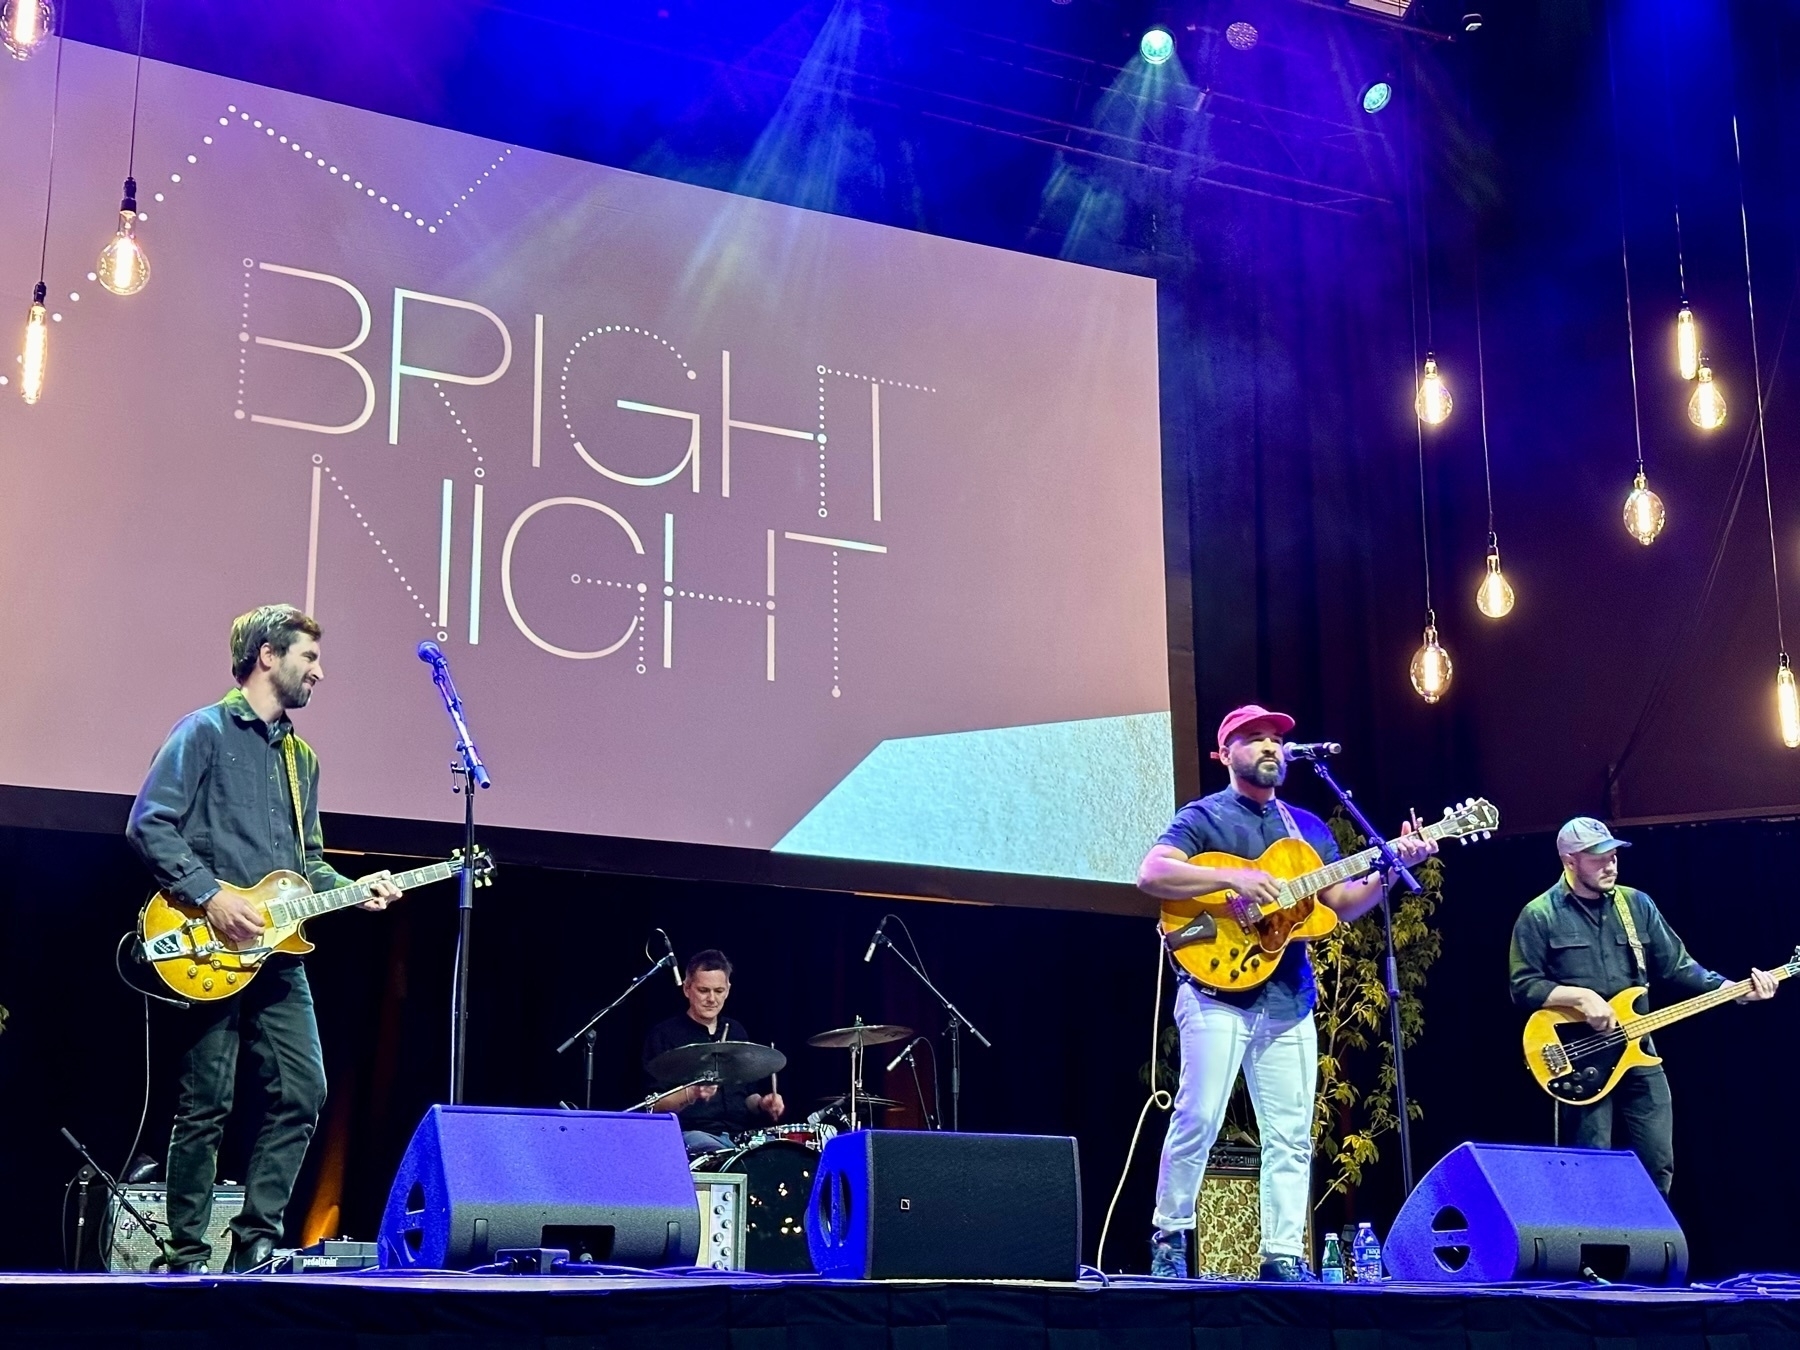 Auto-generated description: A band performs on stage under a sign that reads BRIGHT NIGHT.